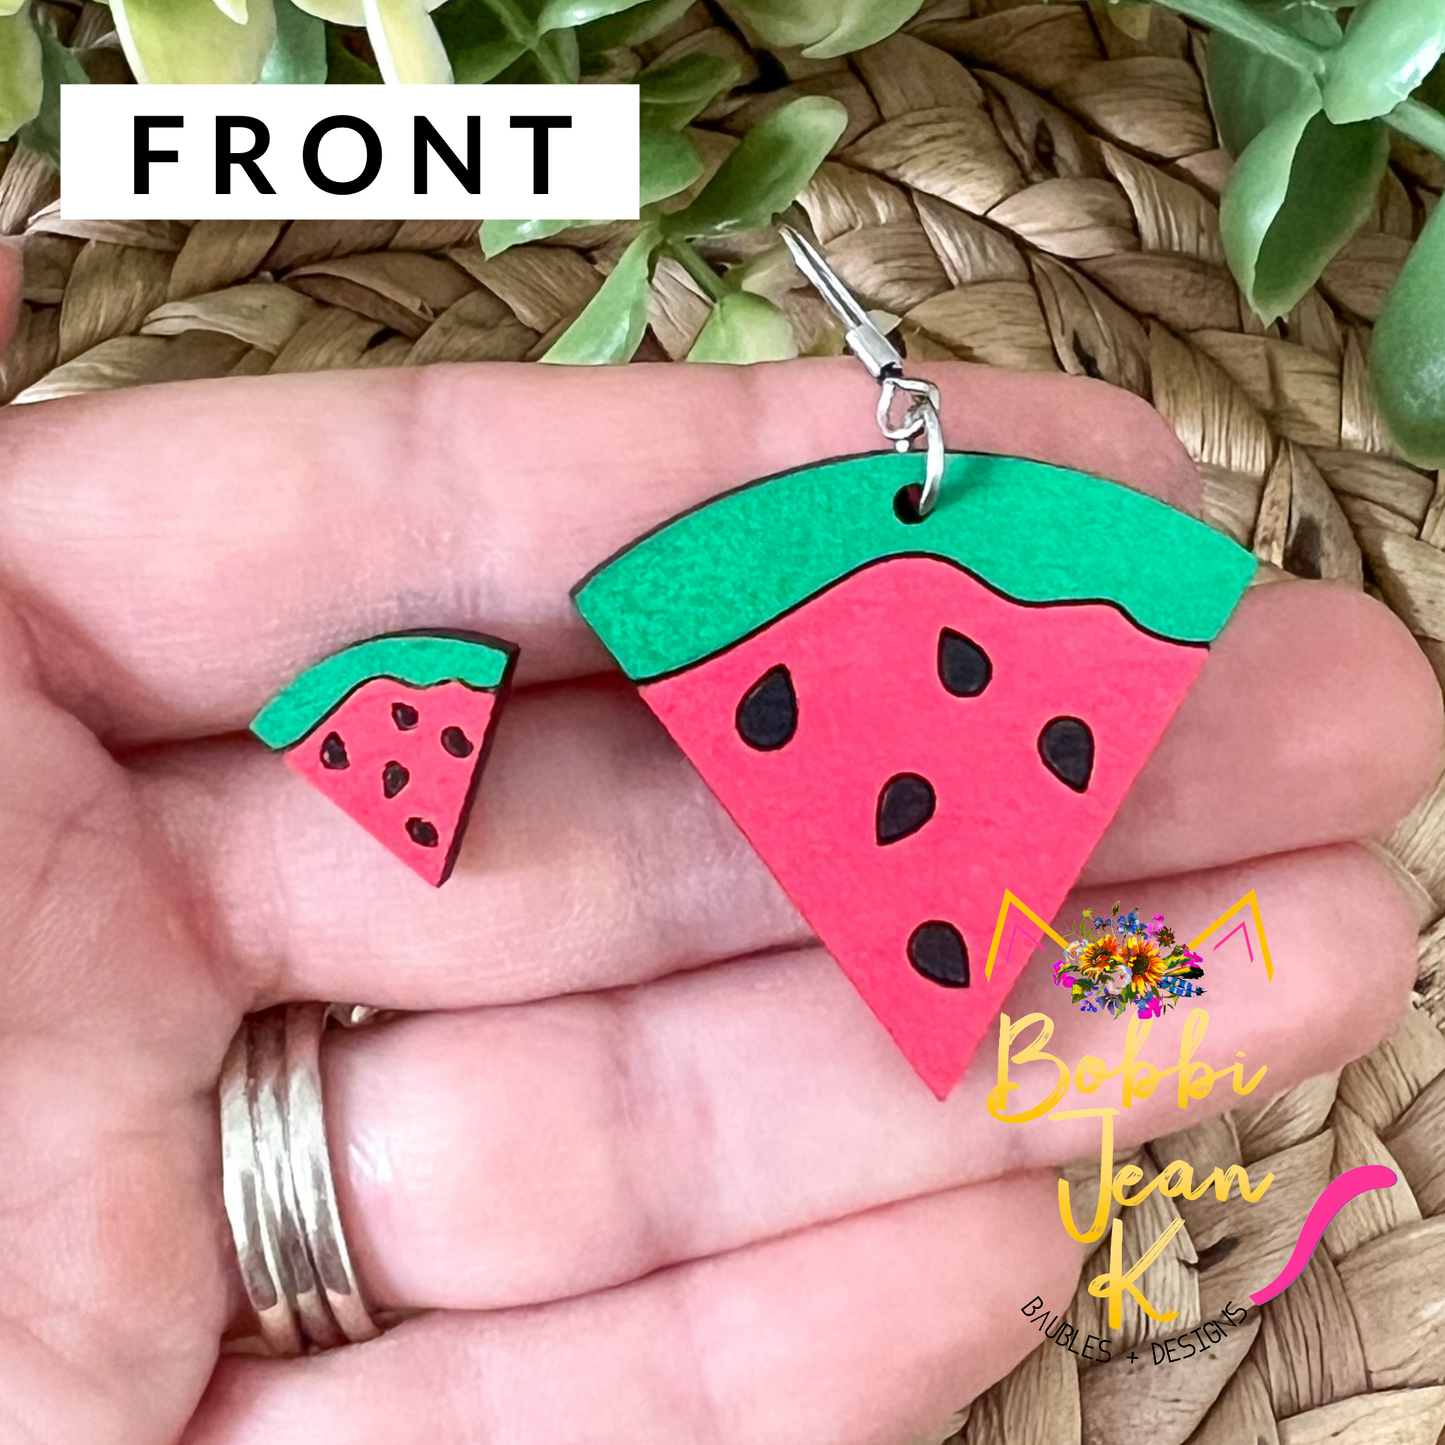 Hand Painted Watermelon Wood Earrings: Choose From Dangle or Stud